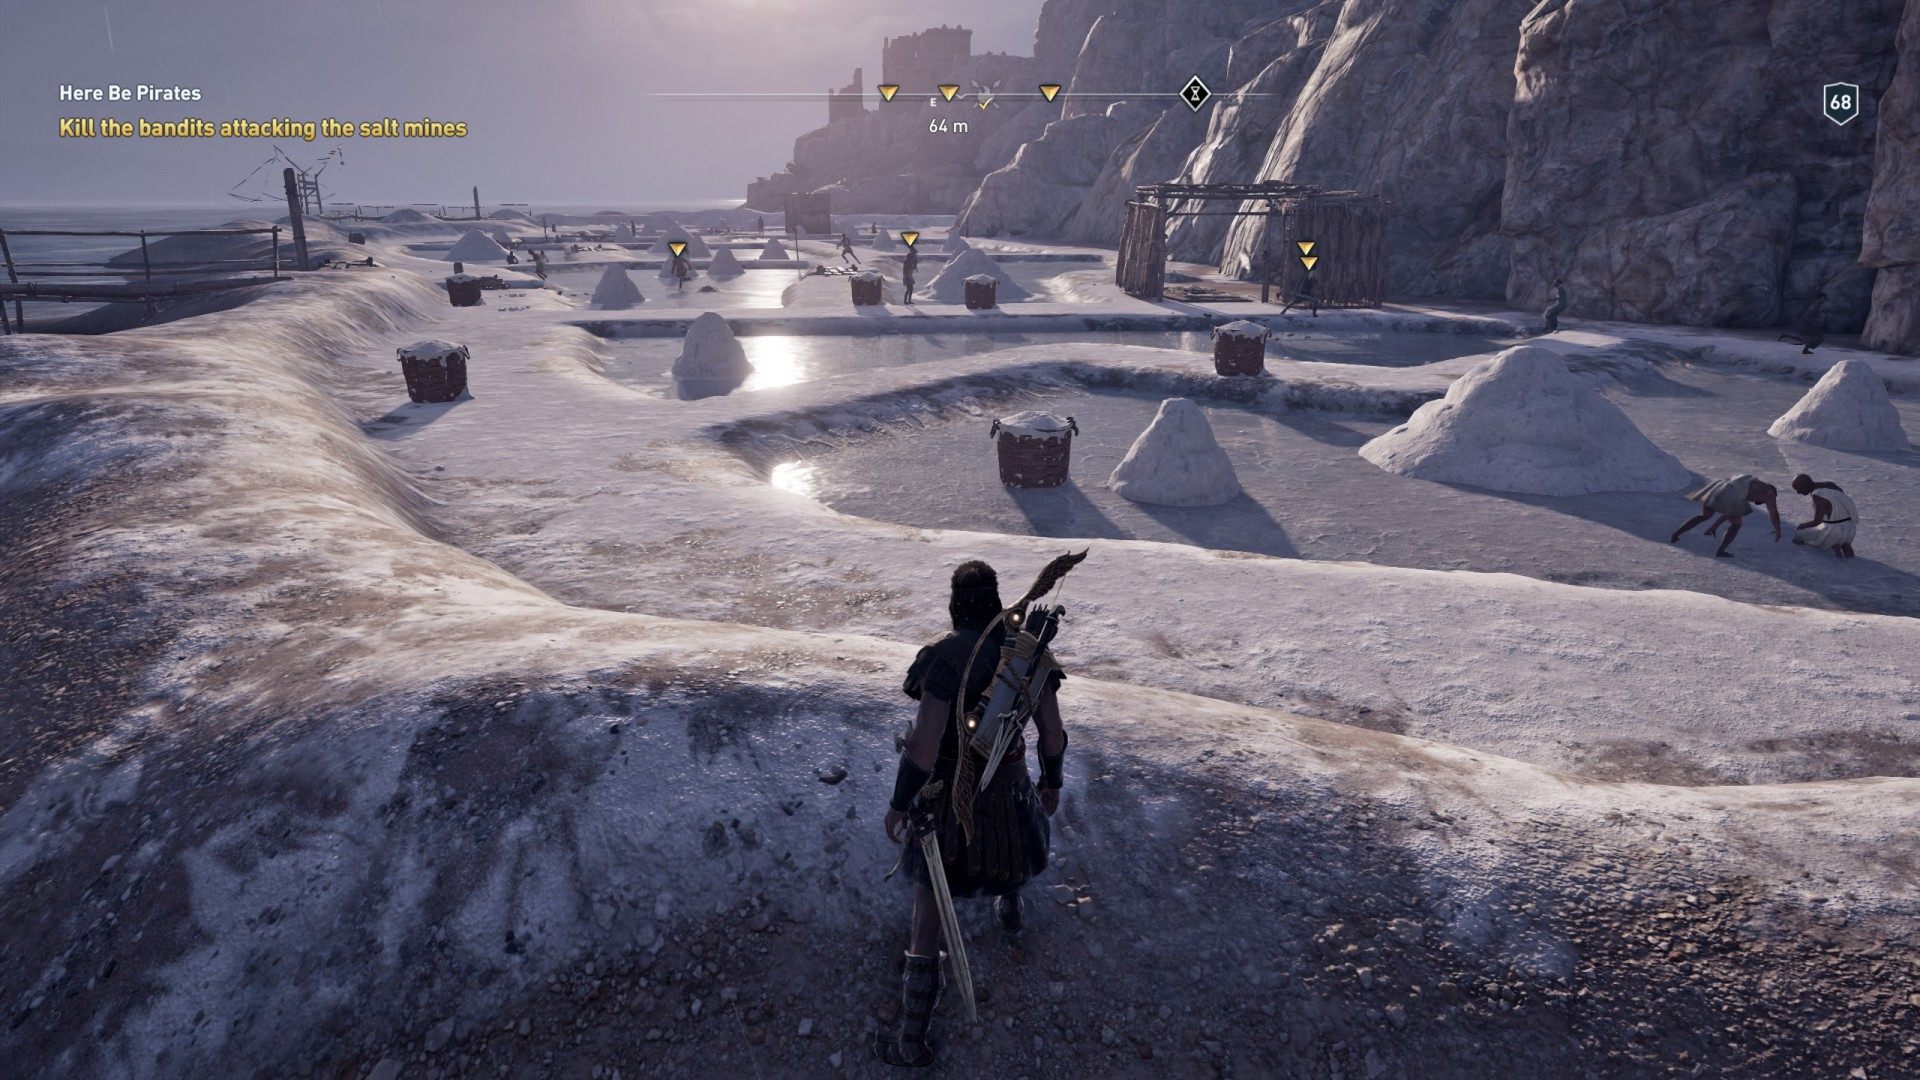 Here Be Pirates, Assassin's Creed Odyssey Quest